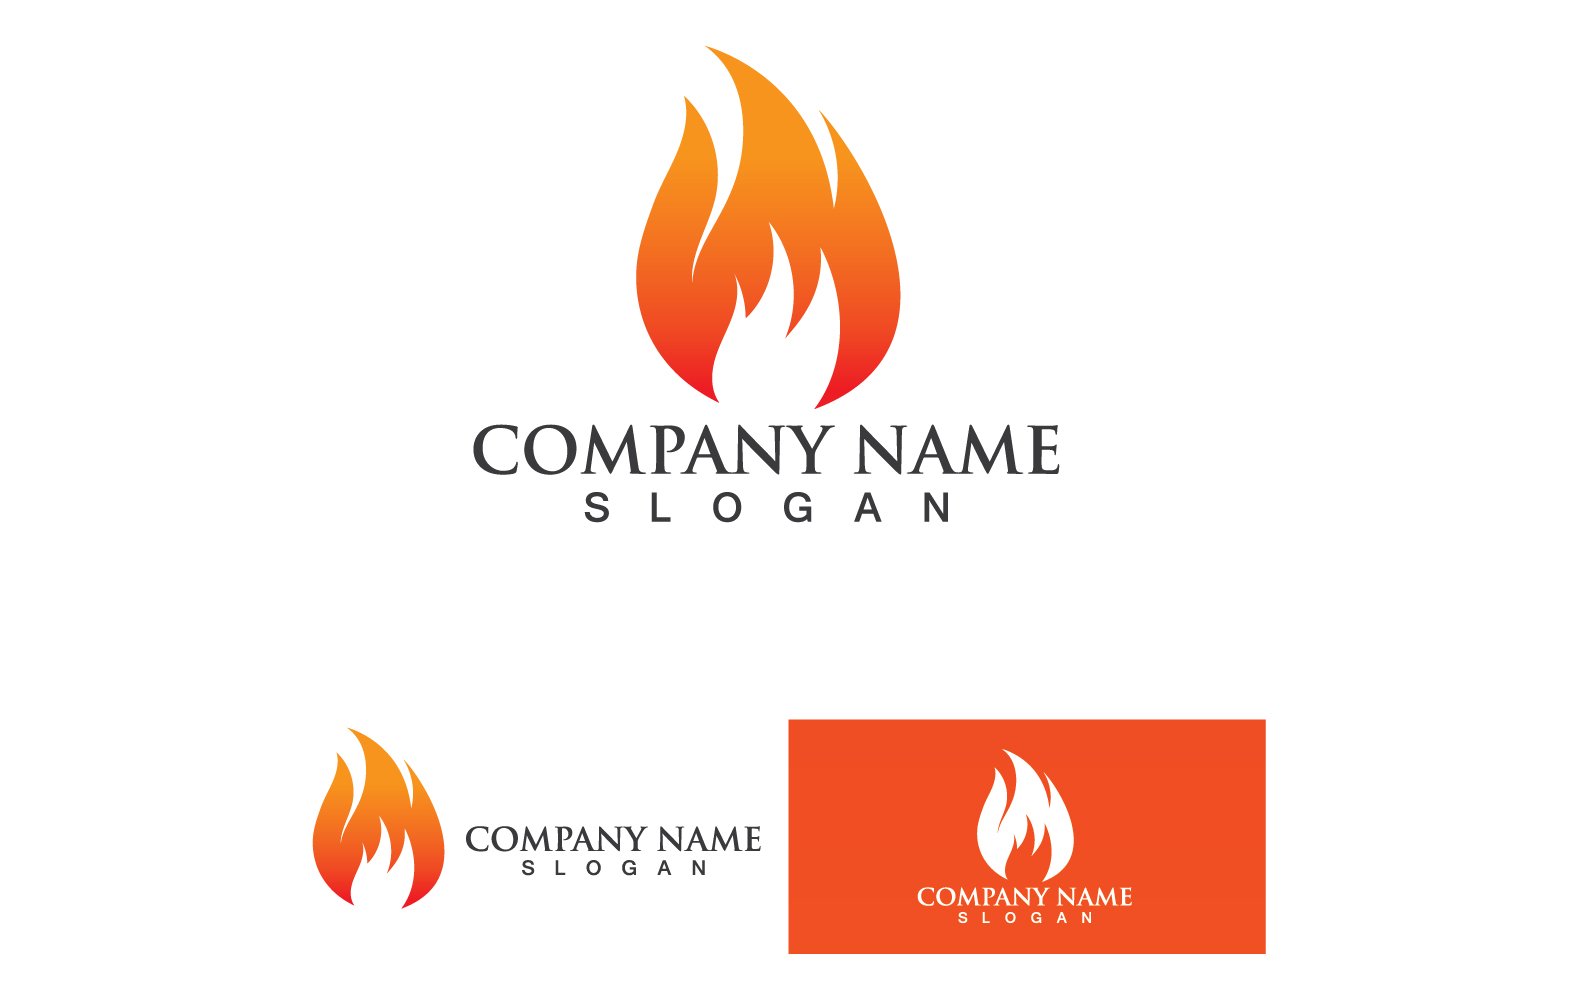 Wing Bird Business Logo Your Company Name V13